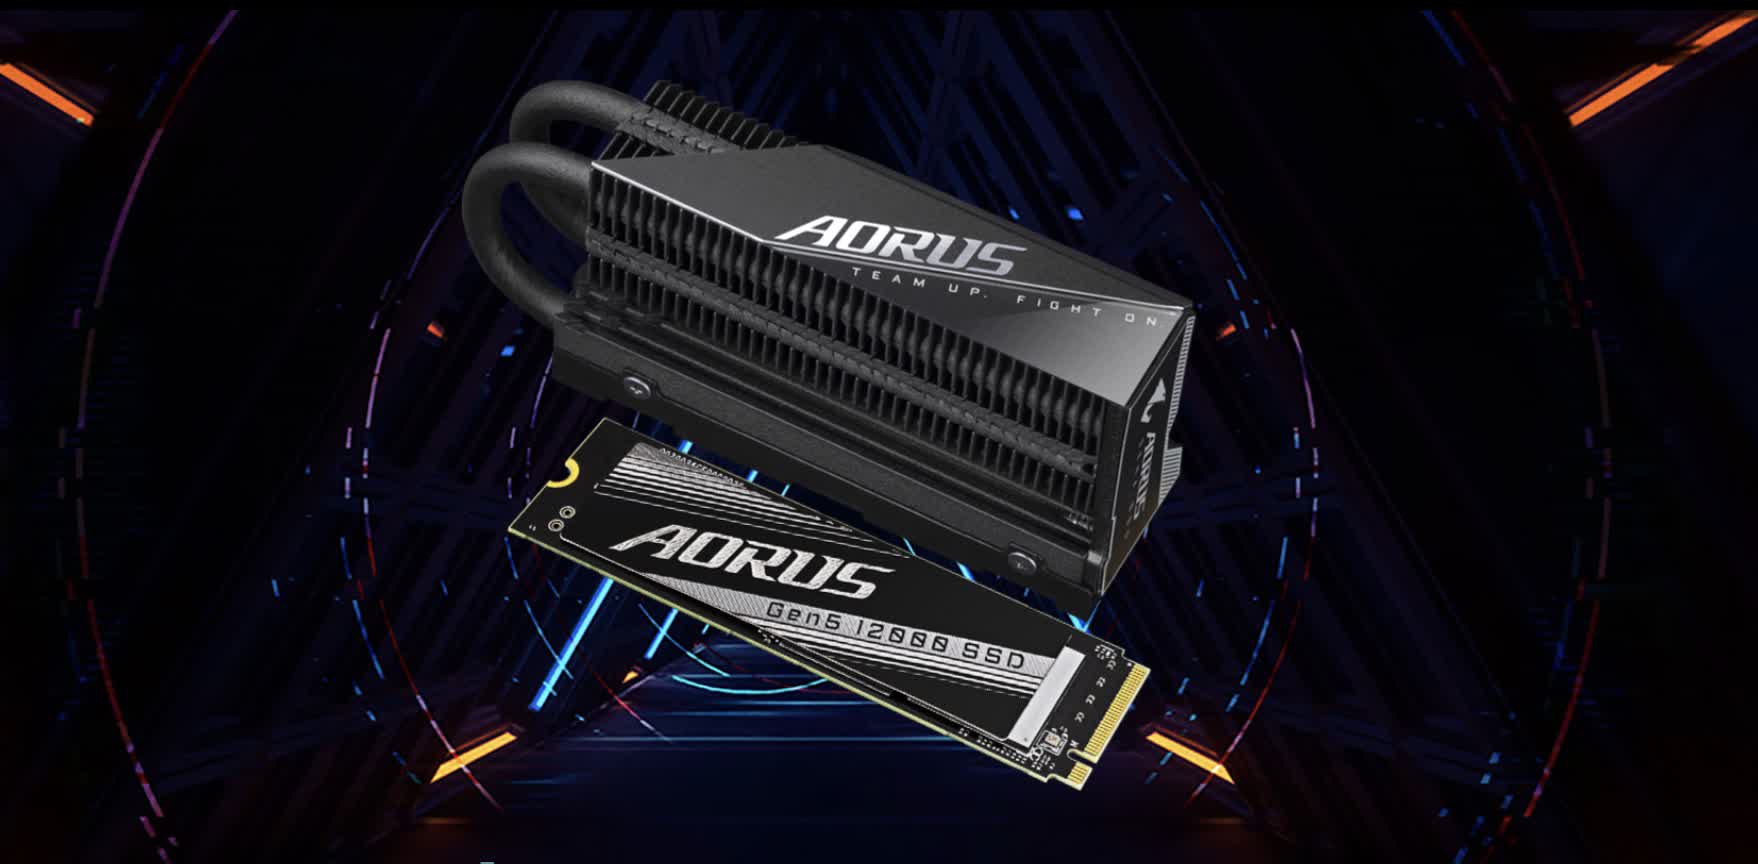 Gigabyte Aorus Gen5 SSD gets upgraded to 12,000 MB/s